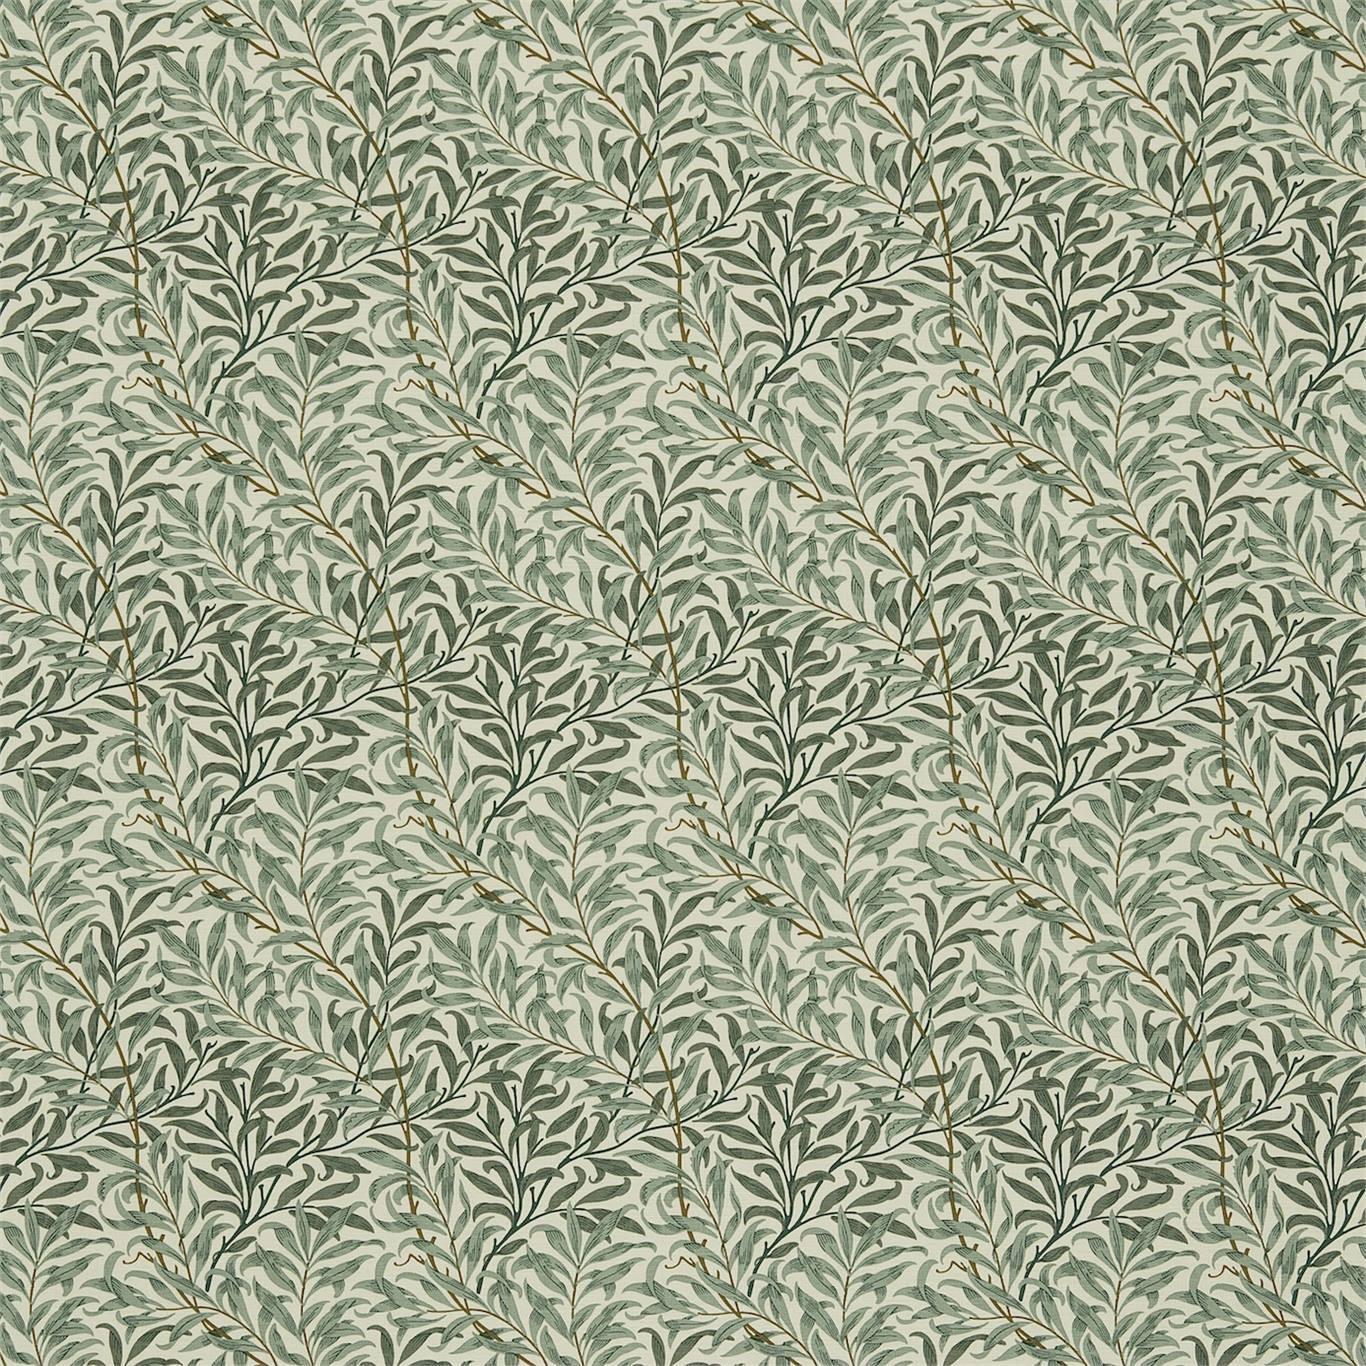 Willow Boughs Cream/Green Fabric By Morris & Co